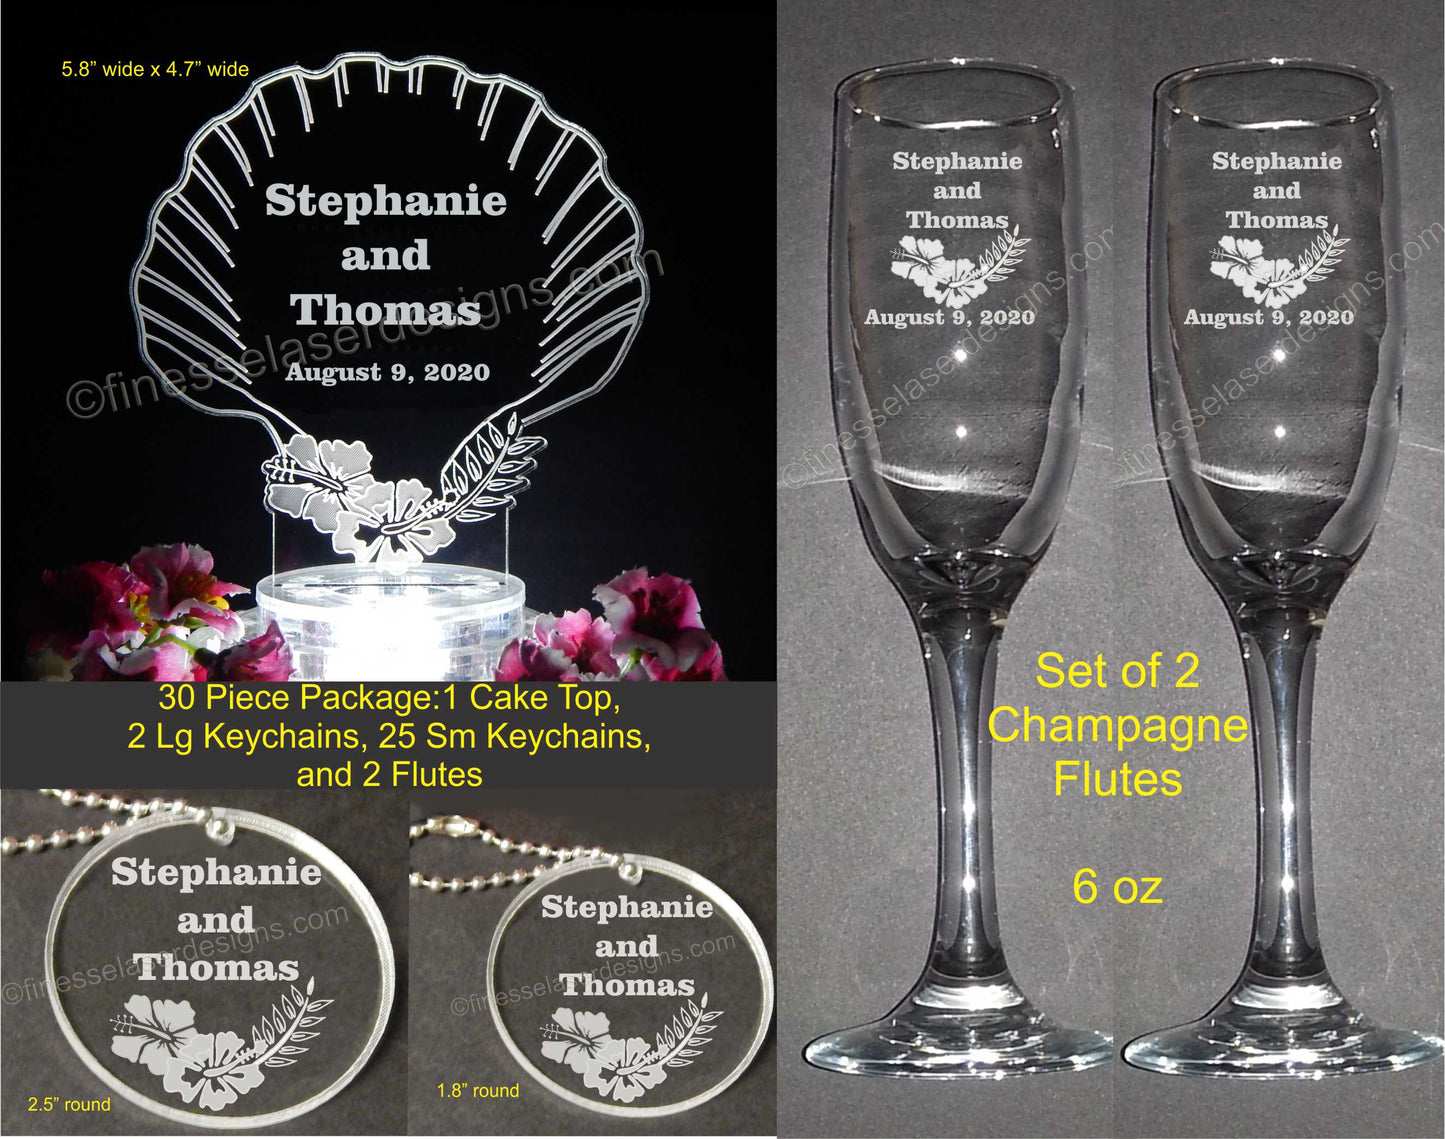 Assorted photos showing wedding package that includes Seashell Shaped Cake Topper, large and small matching keychains, and set of two engraved champagne flutes with sizing information included for each item